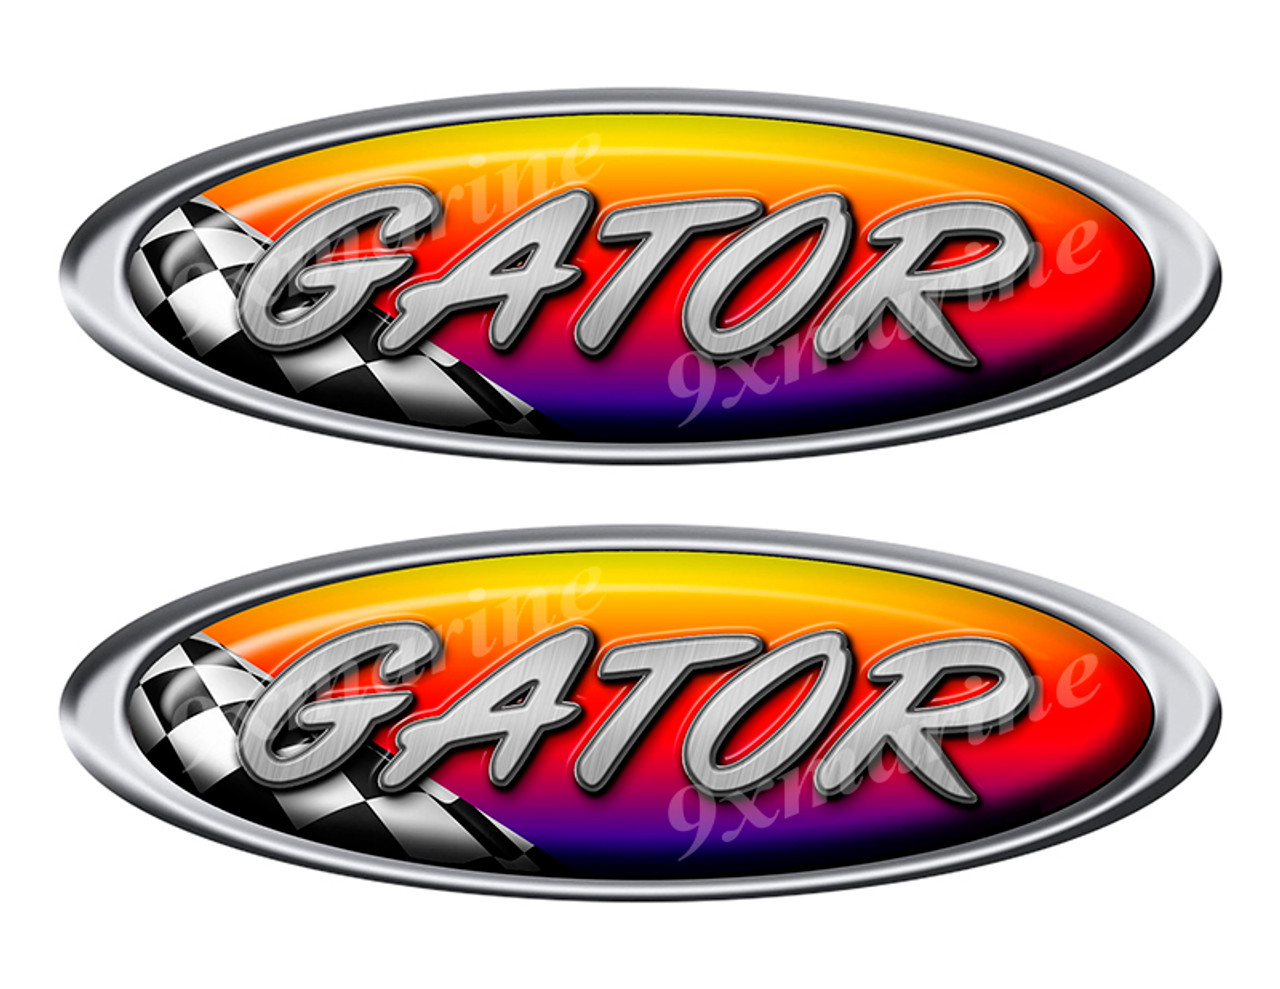 Two Gator 50s Racing Oval Stickers